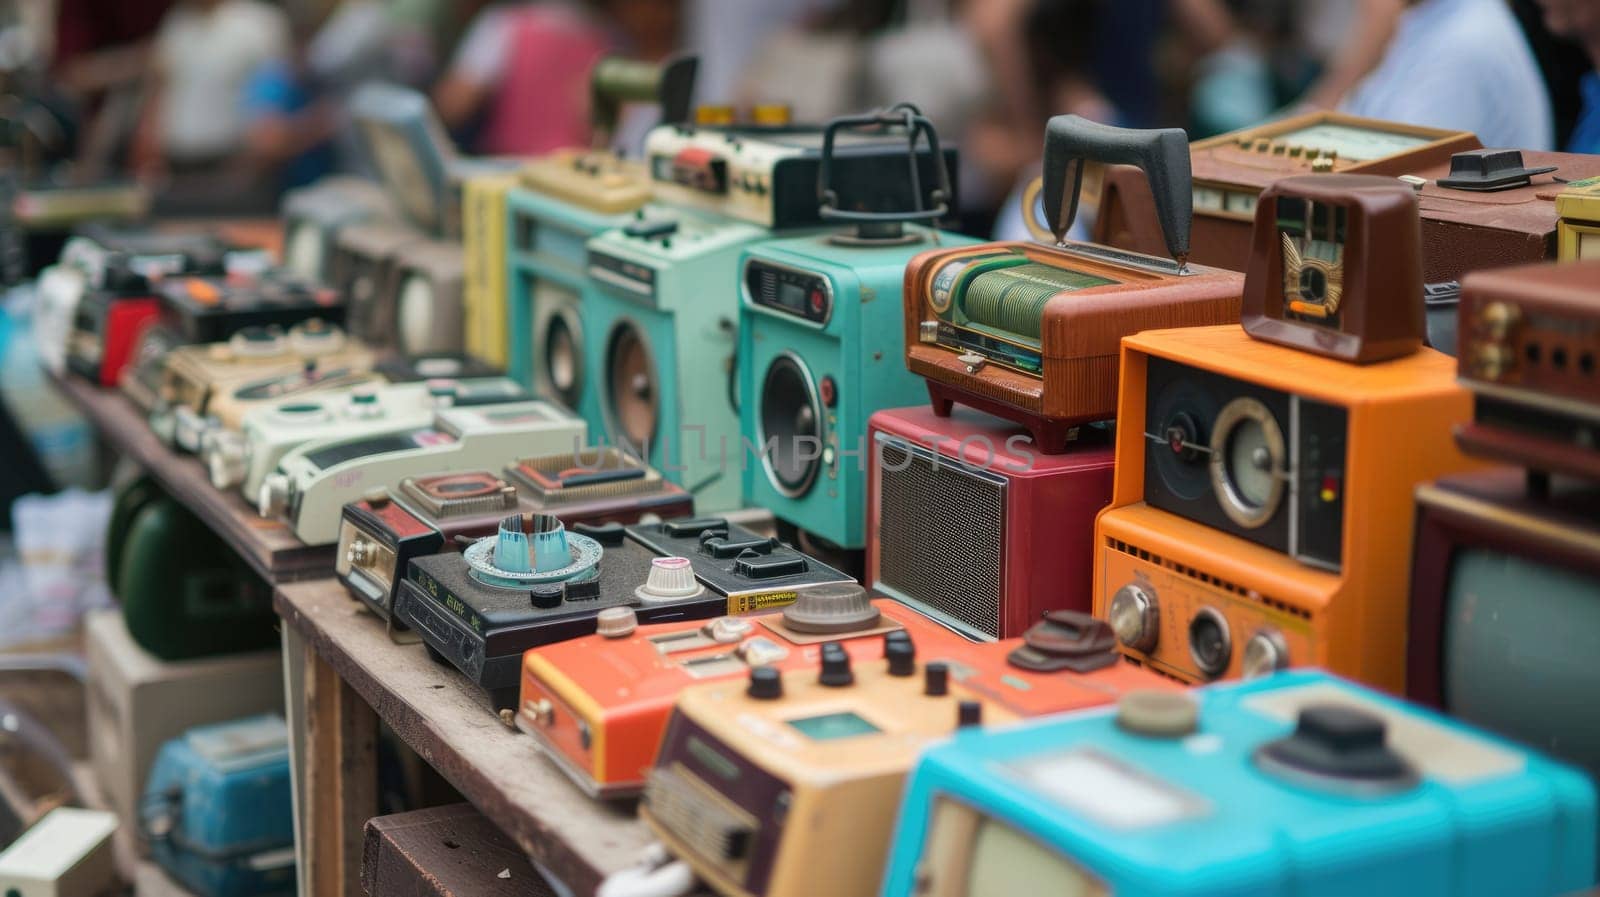 A diverse collection of vintage radios and TVs are displayed on a metal table in a room, sharing the history of engineering and science in the city's building and machine events. AIG41